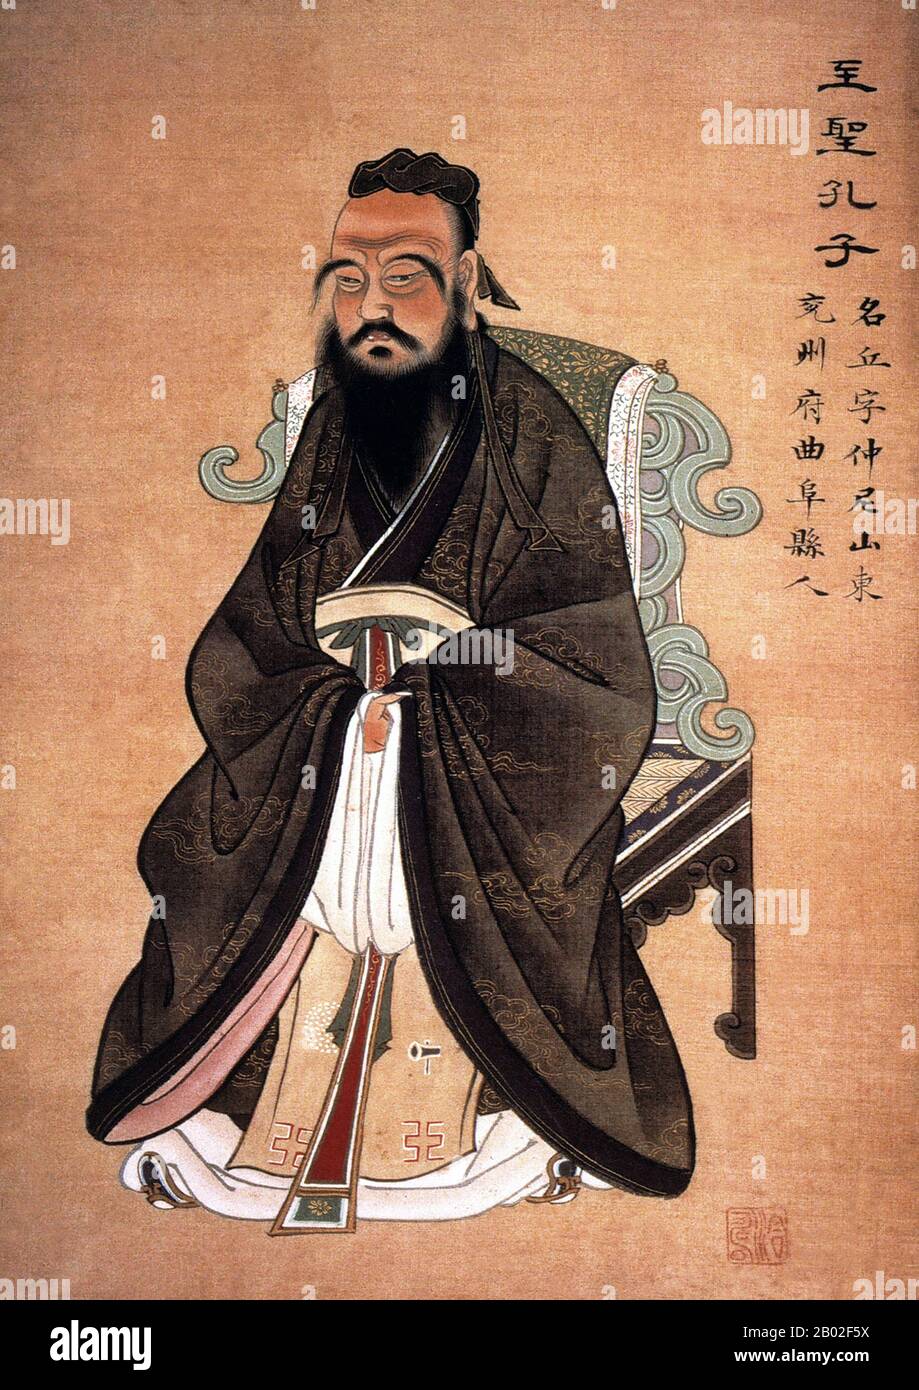 The philosophy of Confucius emphasises personal and governmental morality, correctness of social relationships, justice and sincerity. These values gained prominence in China during the Han Dynasty(206 BC – 220 AD).  Confucius' thoughts have been developed into a system of philosophy known as Confucianism. It was introduced to Europe by the Italian Jesuit Matteo Ricci, who was the first to Latinise the name as 'Confucius'.  His teachings may be found in the Analects of Confucius, a collection of brief aphoristic fragments, which was compiled many years after his death. Stock Photo